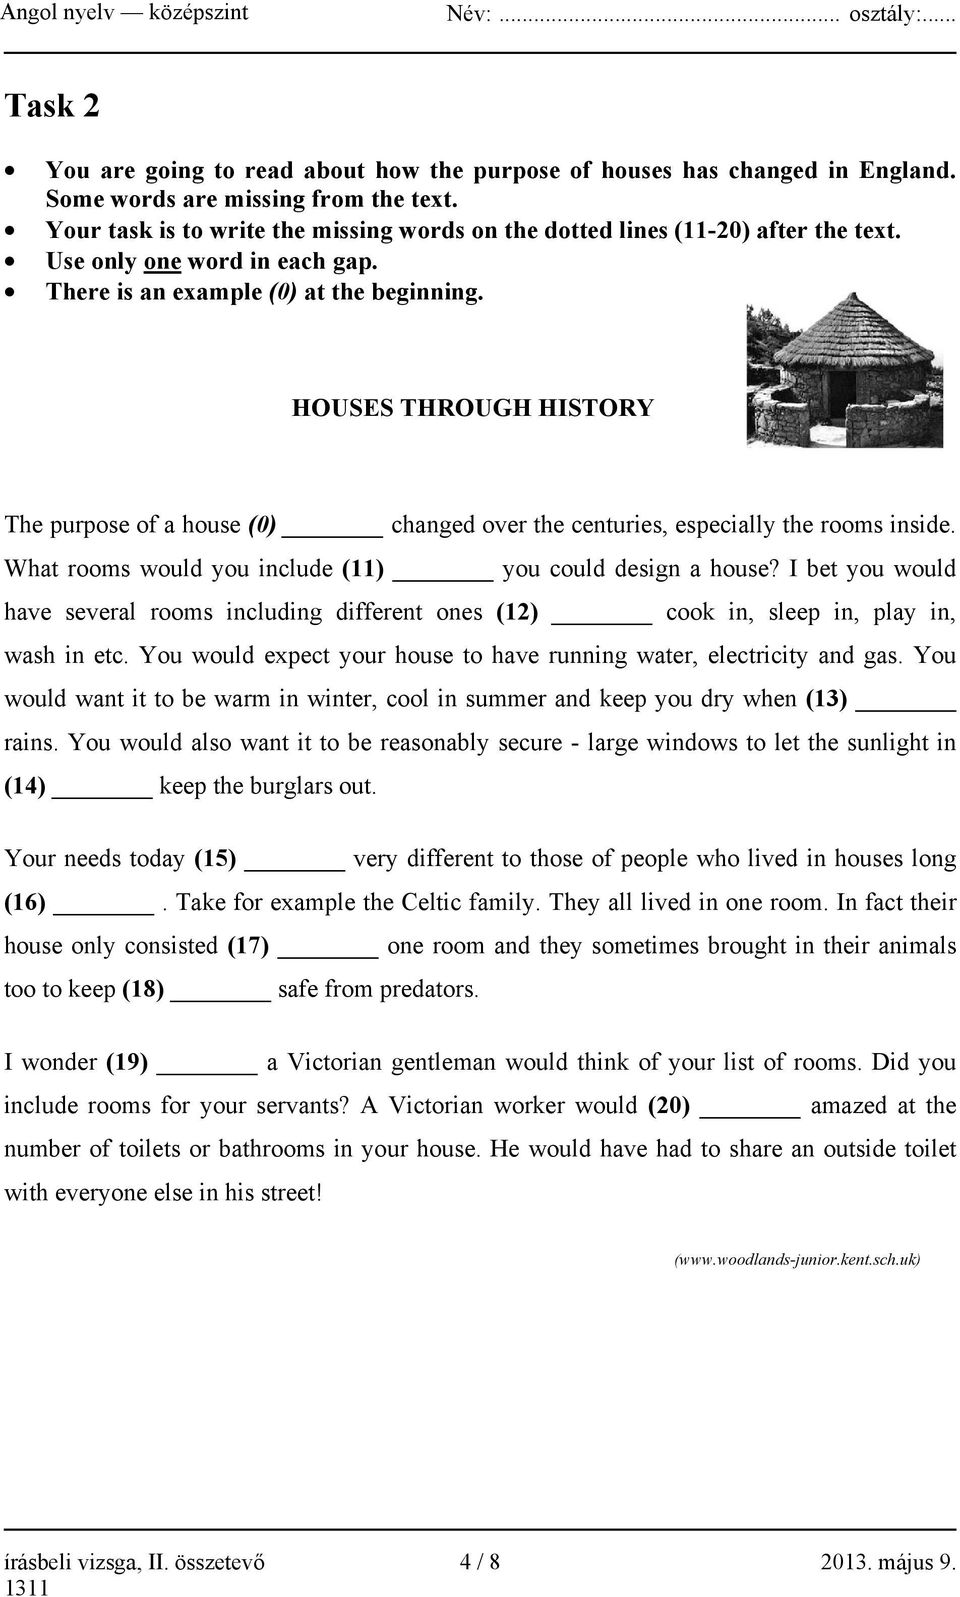 HOUSES THROUGH HISTORY The purpose of a house (0) changed over the centuries, especially the rooms inside. What rooms would you include (11) you could design a house?